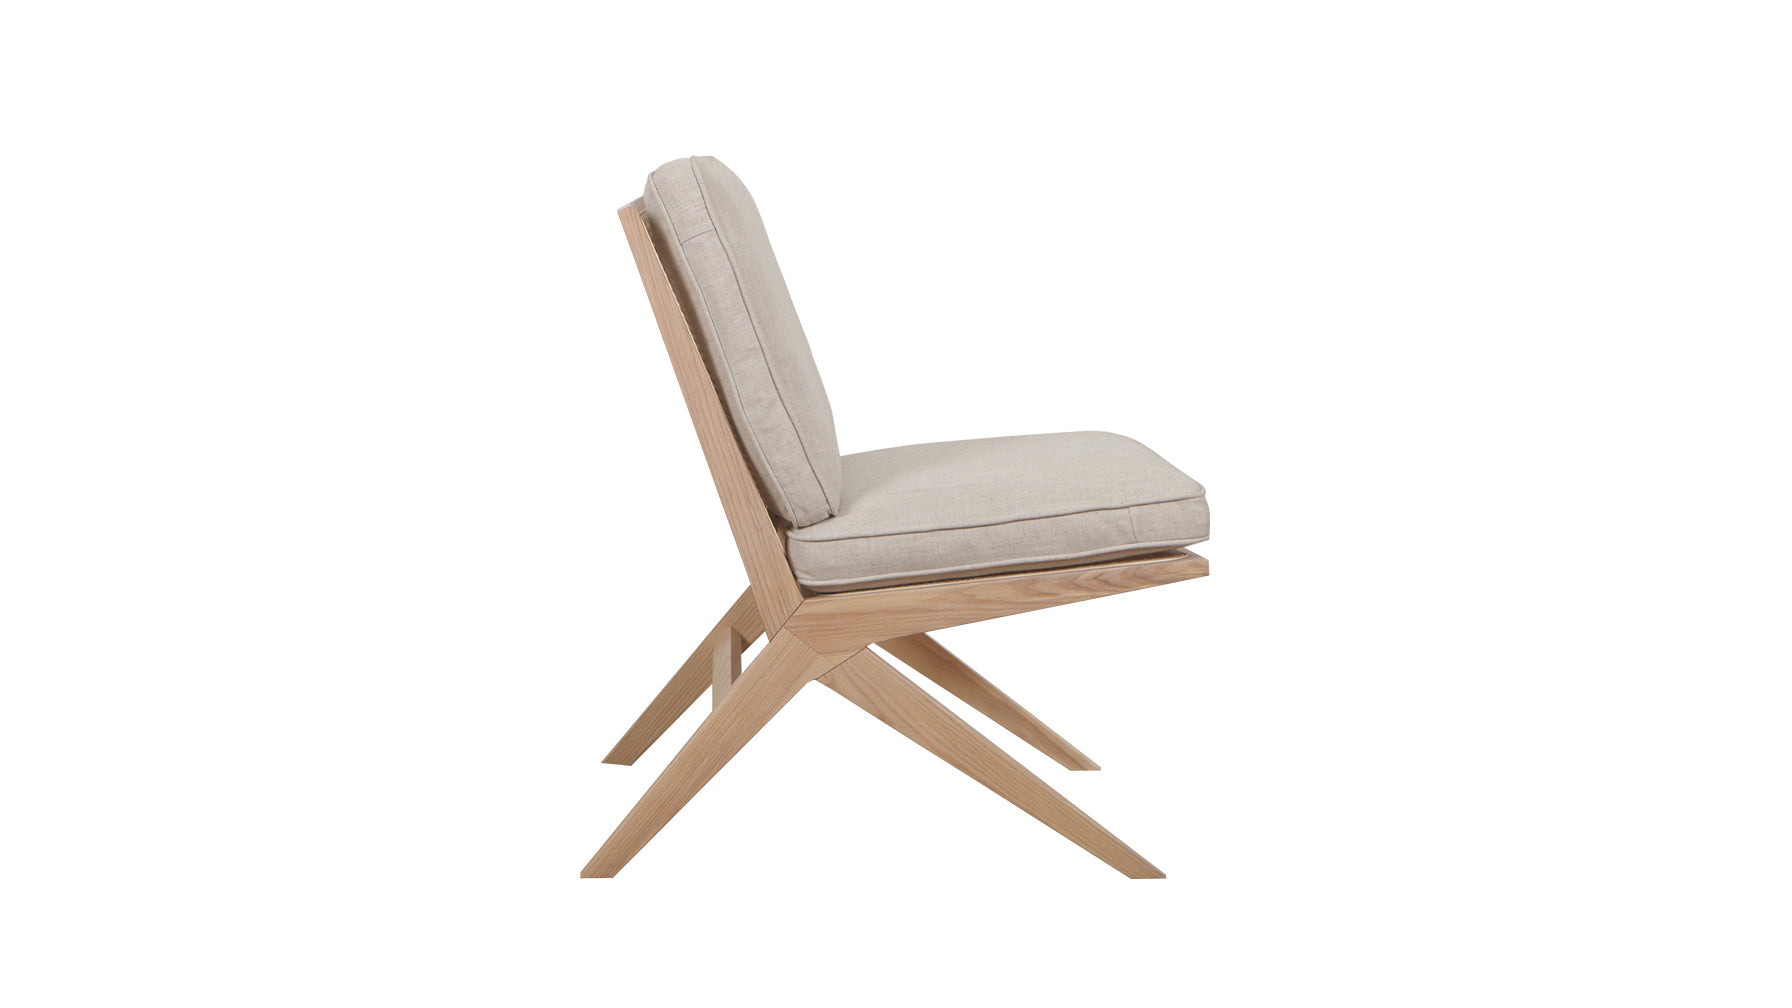 Endless Summer Lounge Chair with Cushion, White Ash/Natural Fabric - Image 4